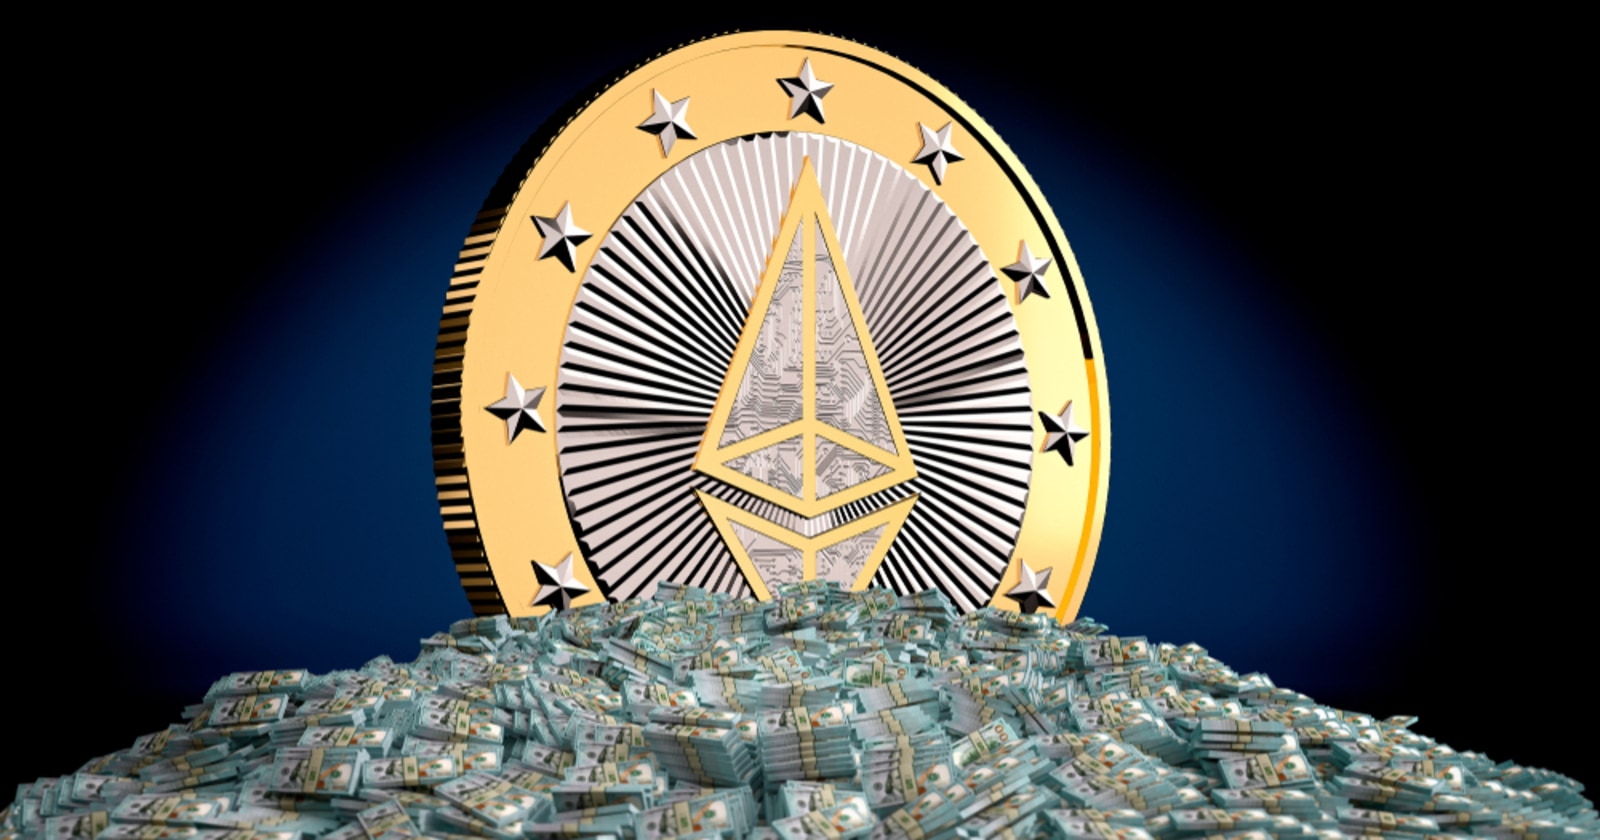 Picture of a giant Ethereum coin standing in a heap of U.S. dollars